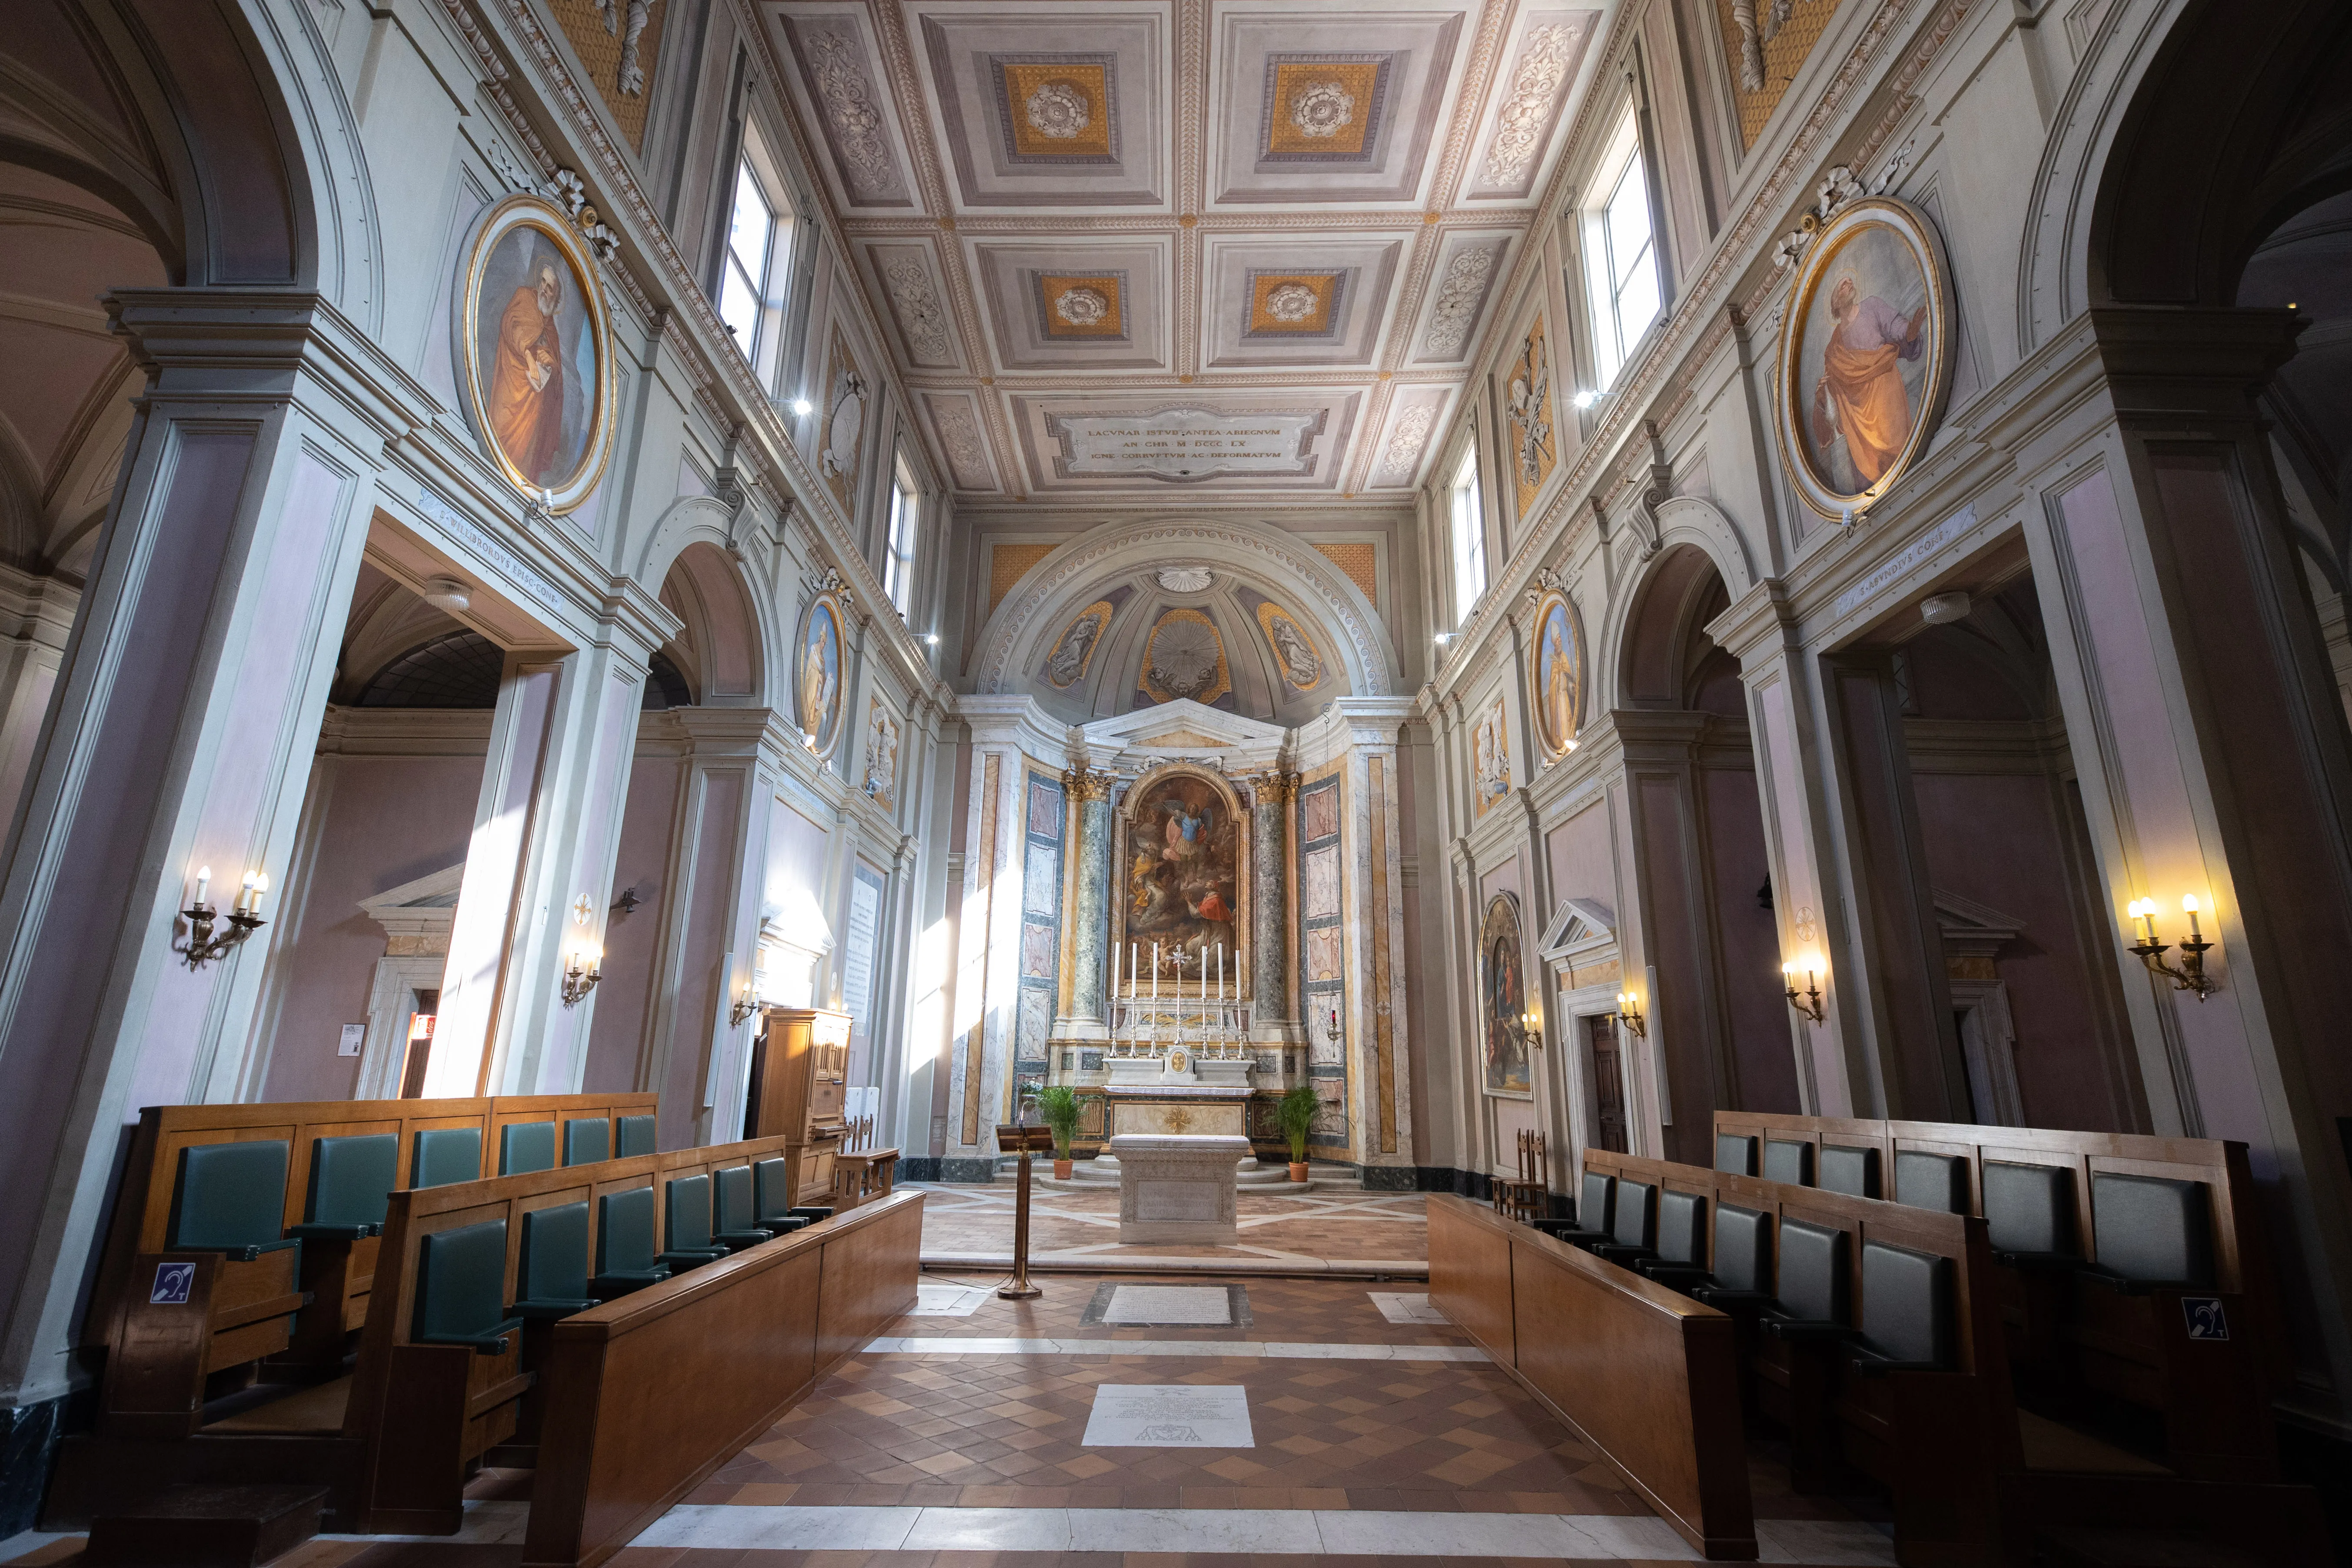 The Church of Saints Michael and Magnus, close to the Vatican, uses four of the bench seats from the Second Vatican Council as choir stalls for prayer.?w=200&h=150